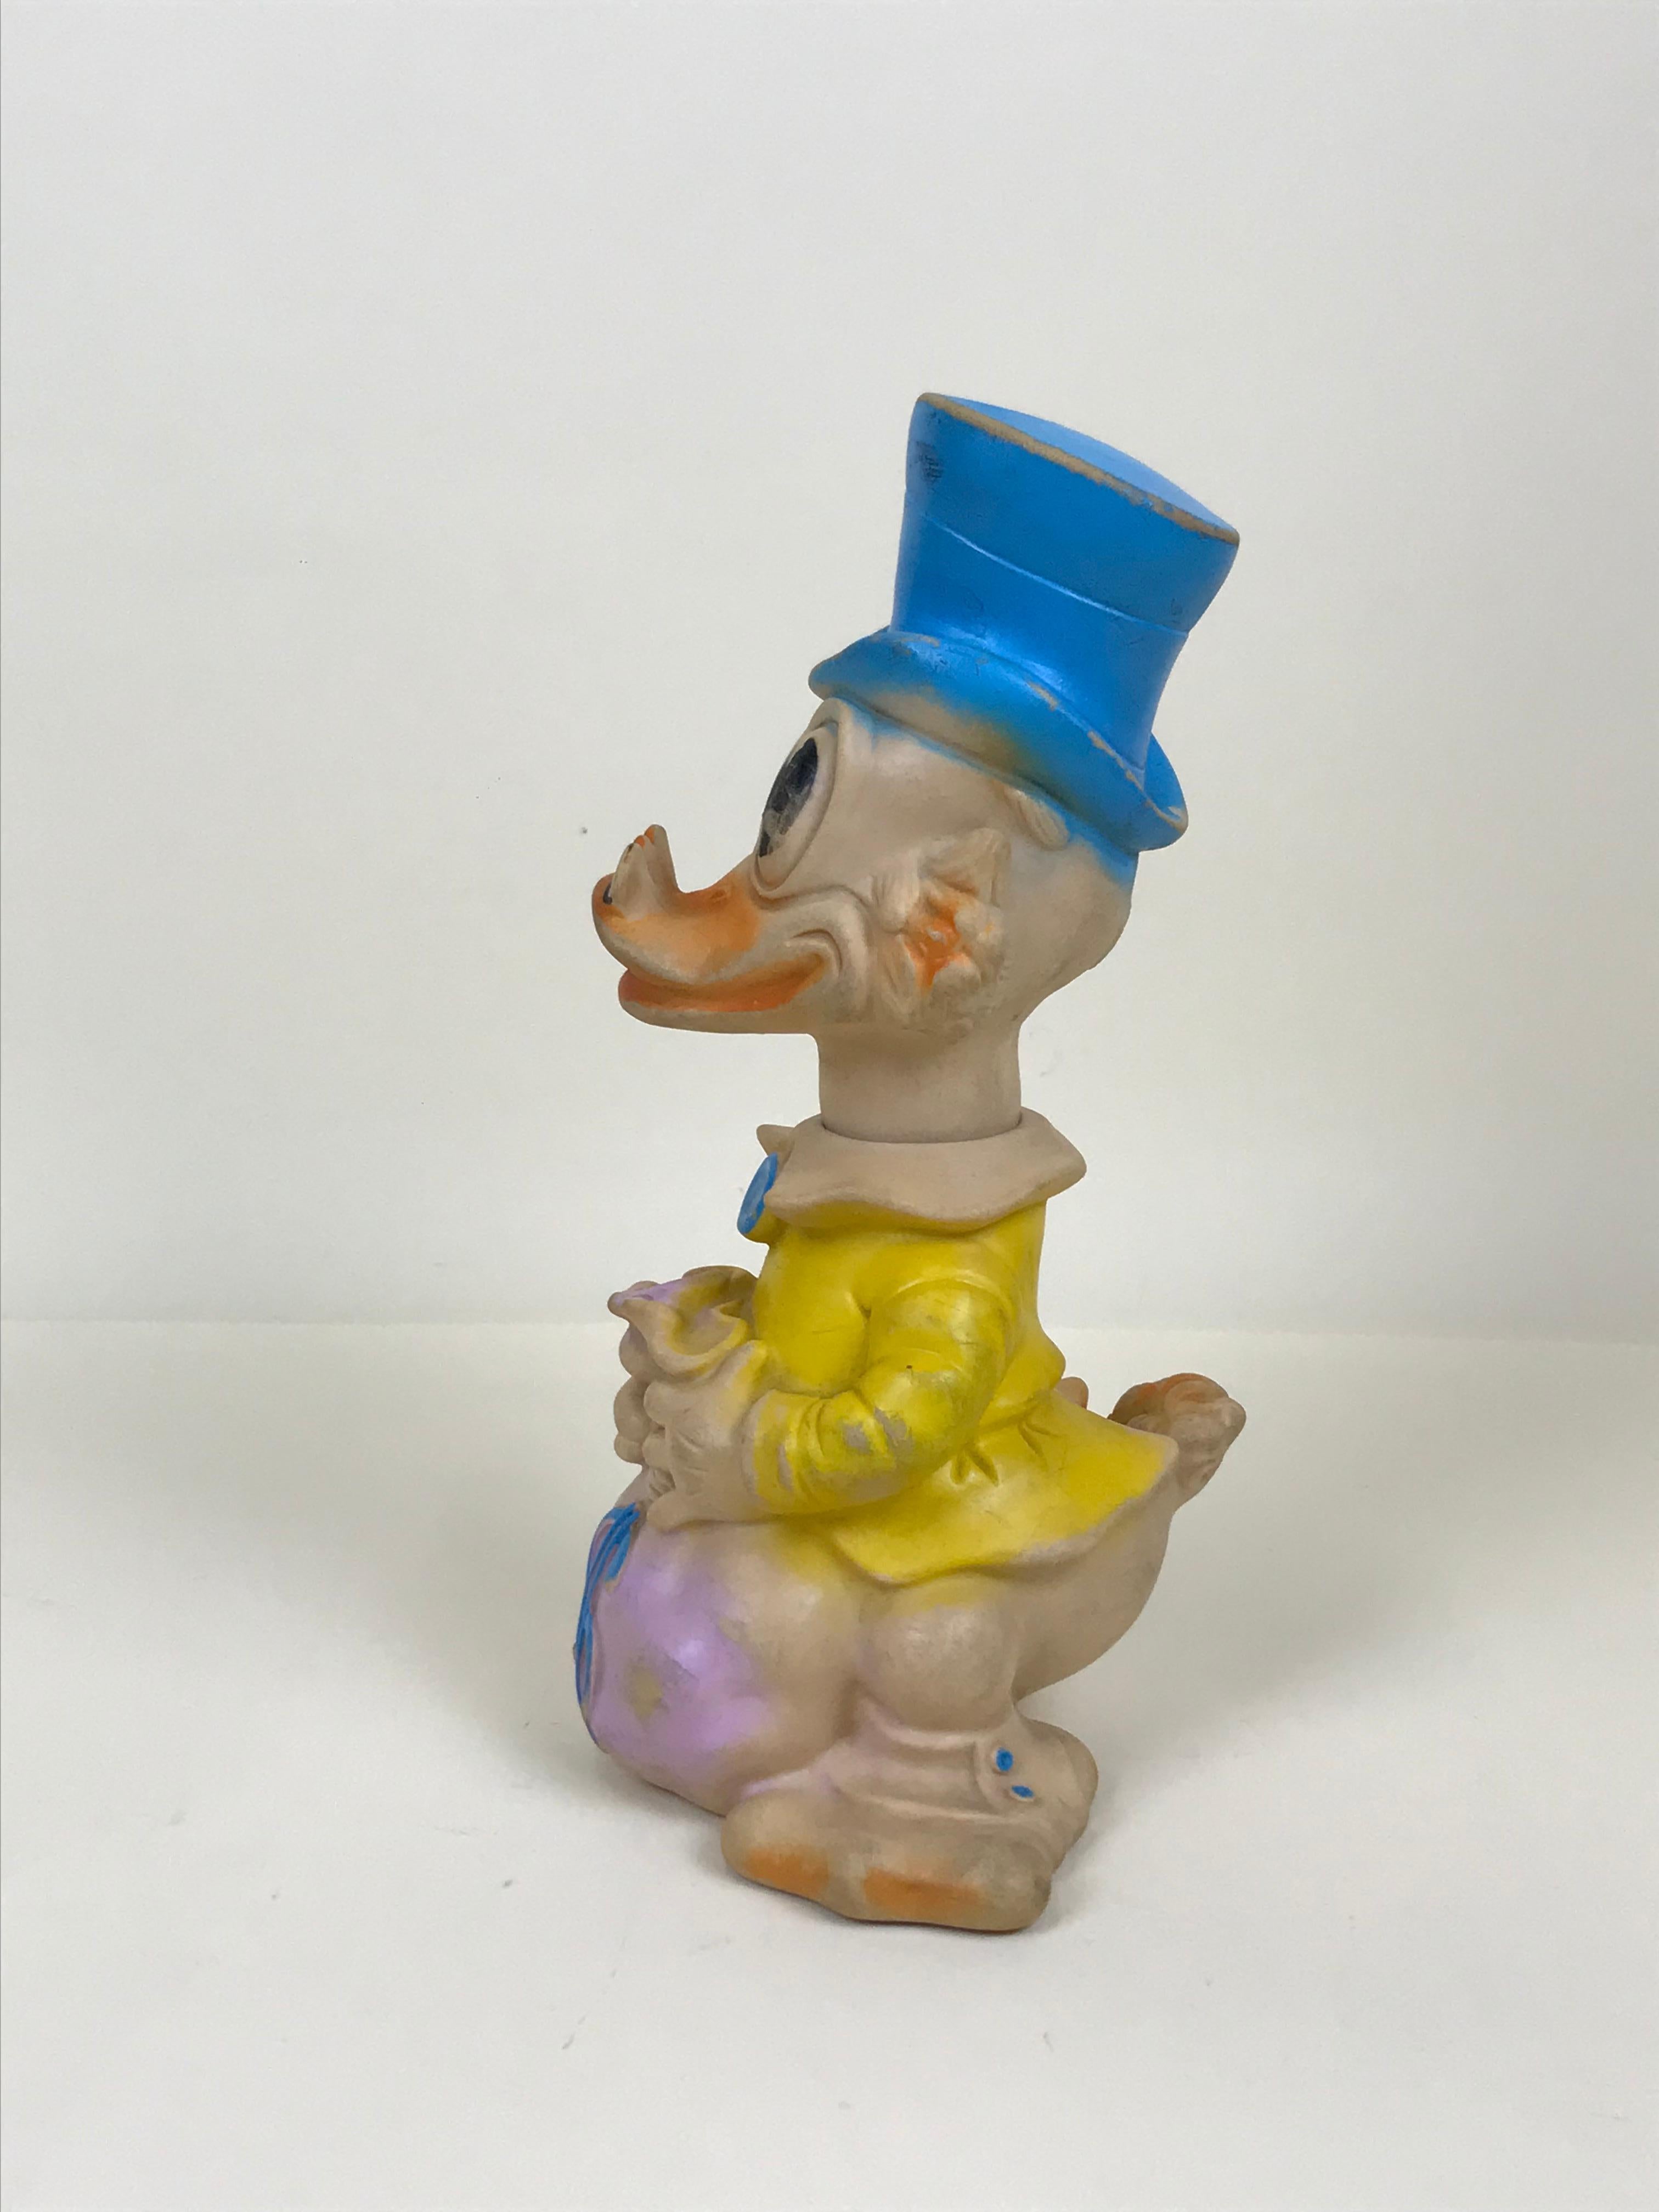 Mid-Century Modern 1960s Vintage Yellow Uncle Scrooge Squeak Toy Made in Ex Yugoslavia by Biserka  For Sale